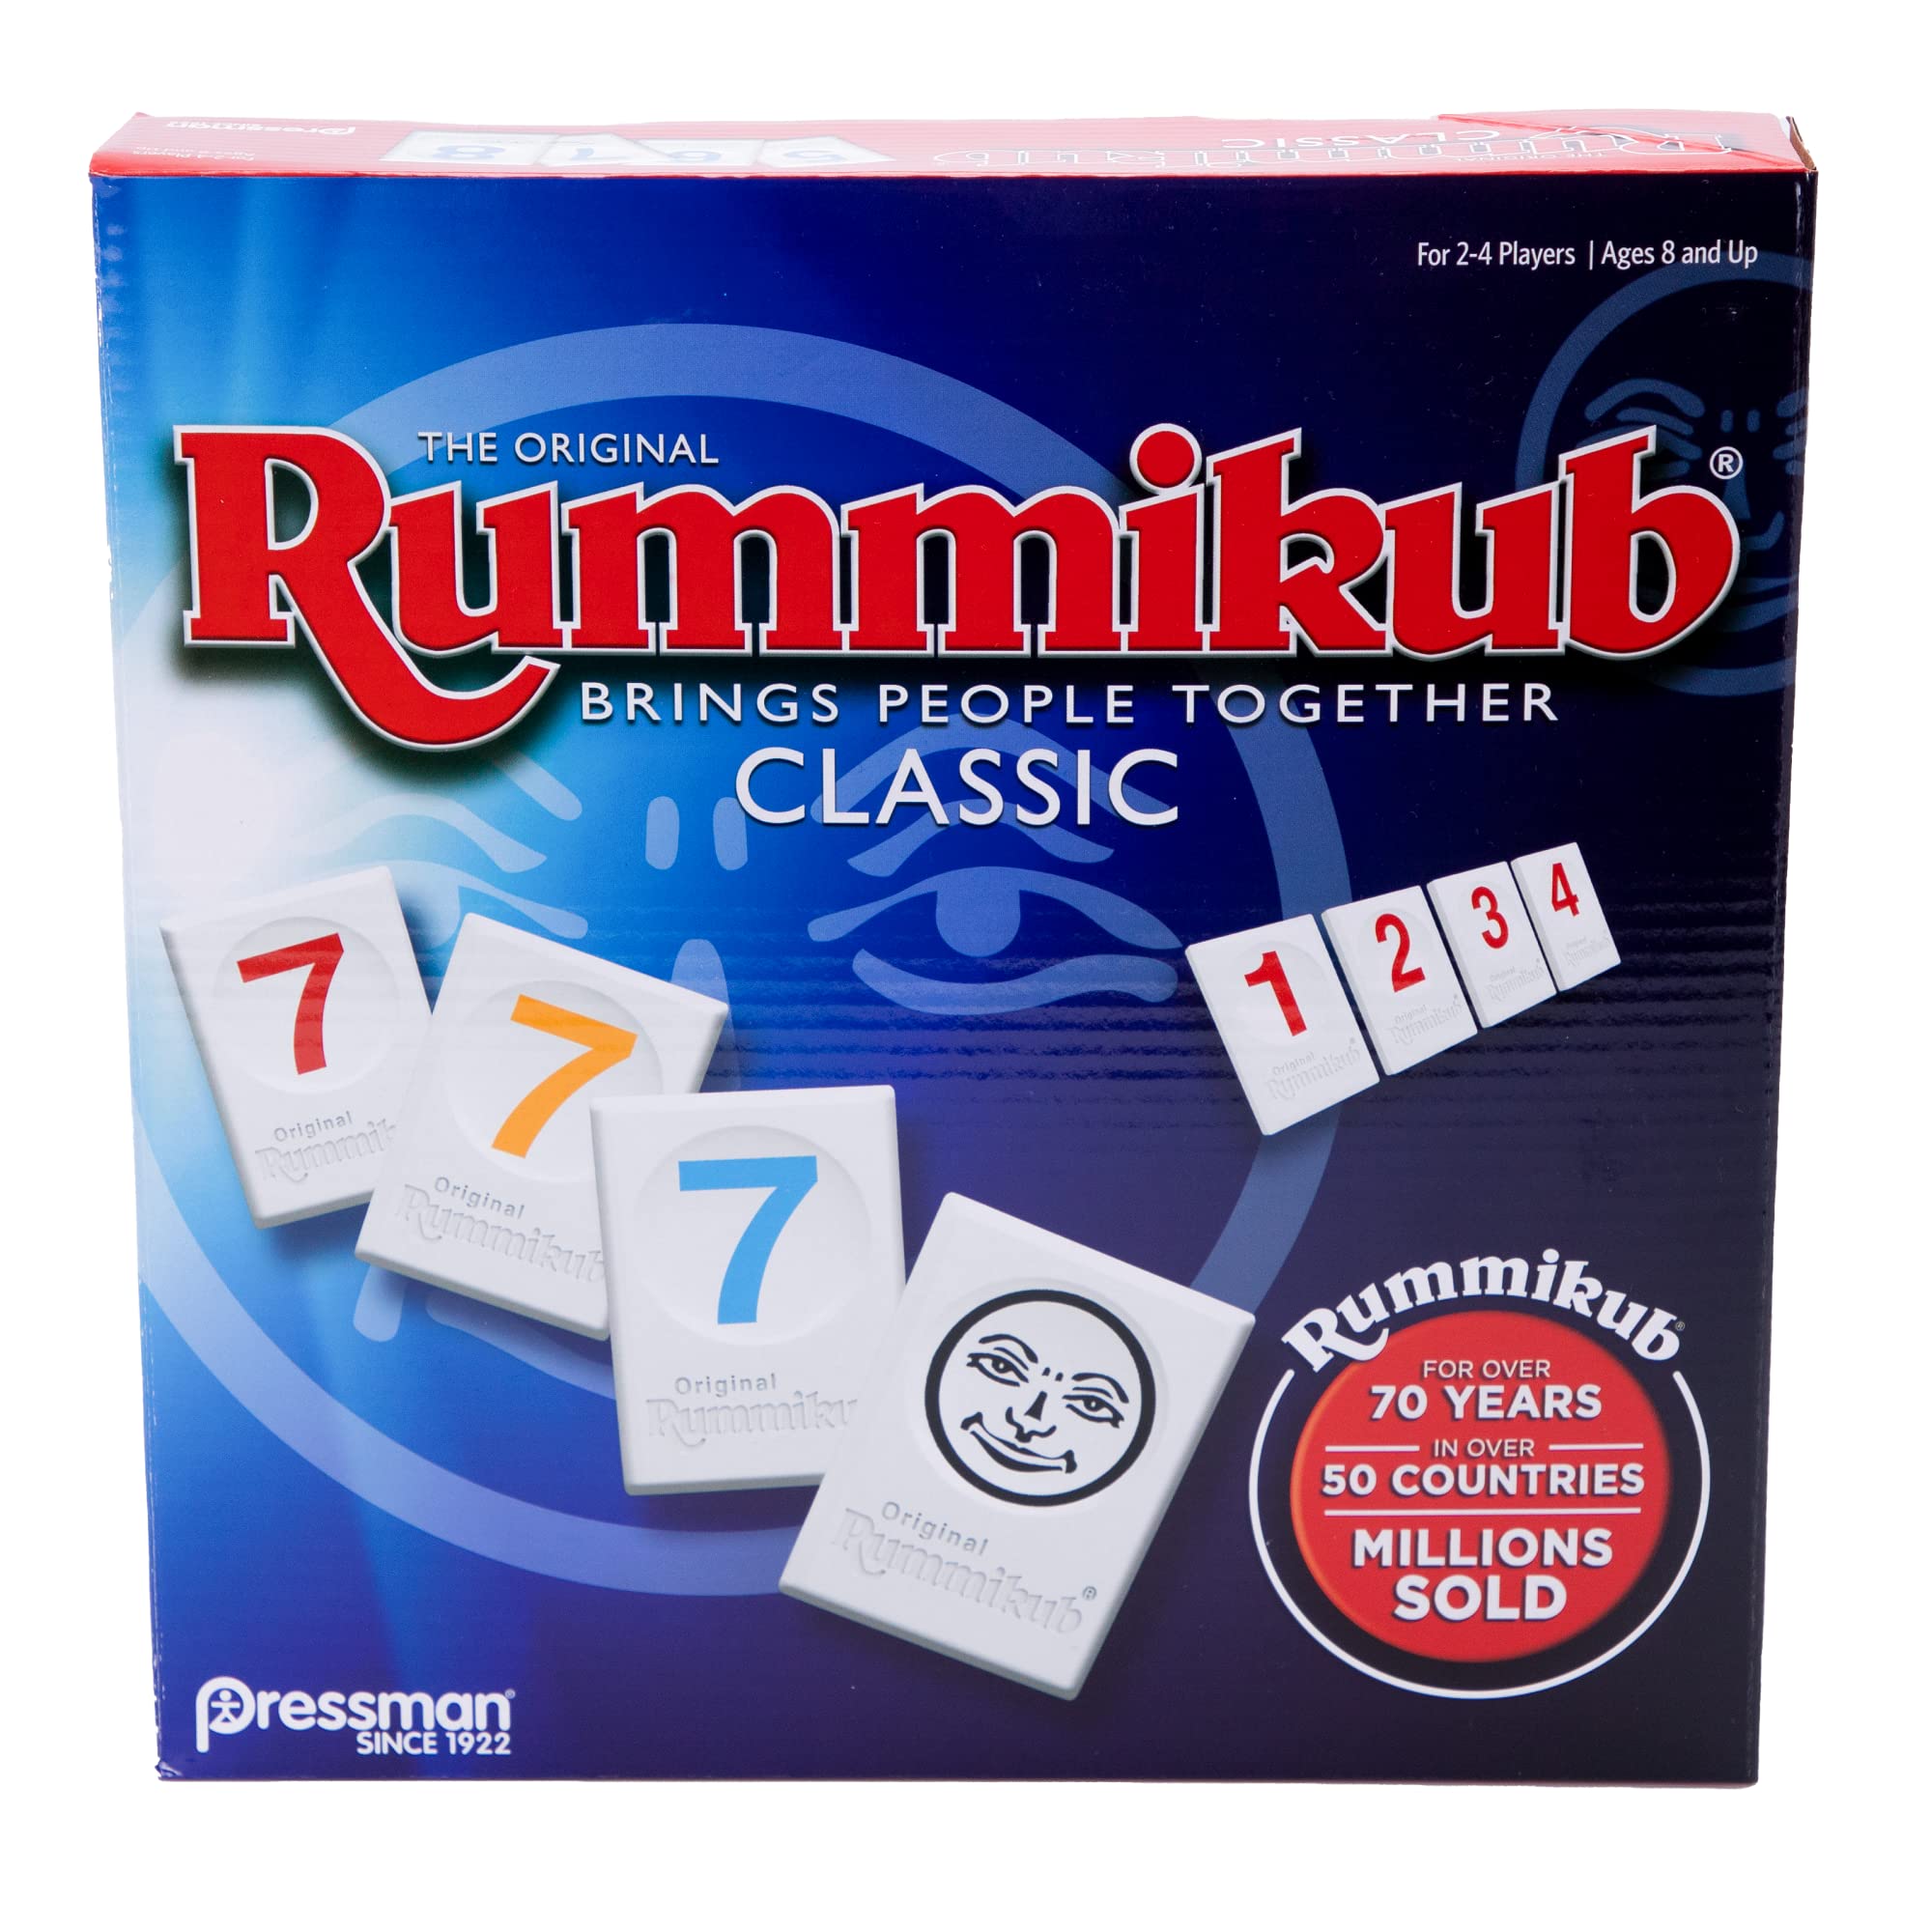 Bicycle Rider Back Playing Cards,12 Count (Pack of 1) & Rummikub - The Original Rummy Tile Game by Pressman